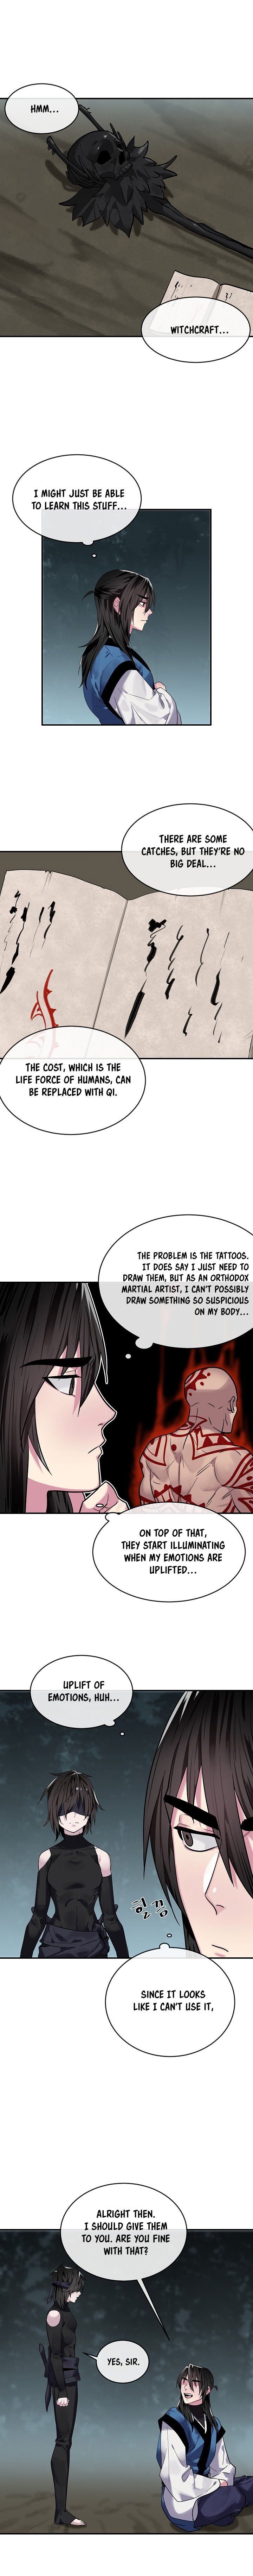 Volcanic Age Chapter 151 Page 1